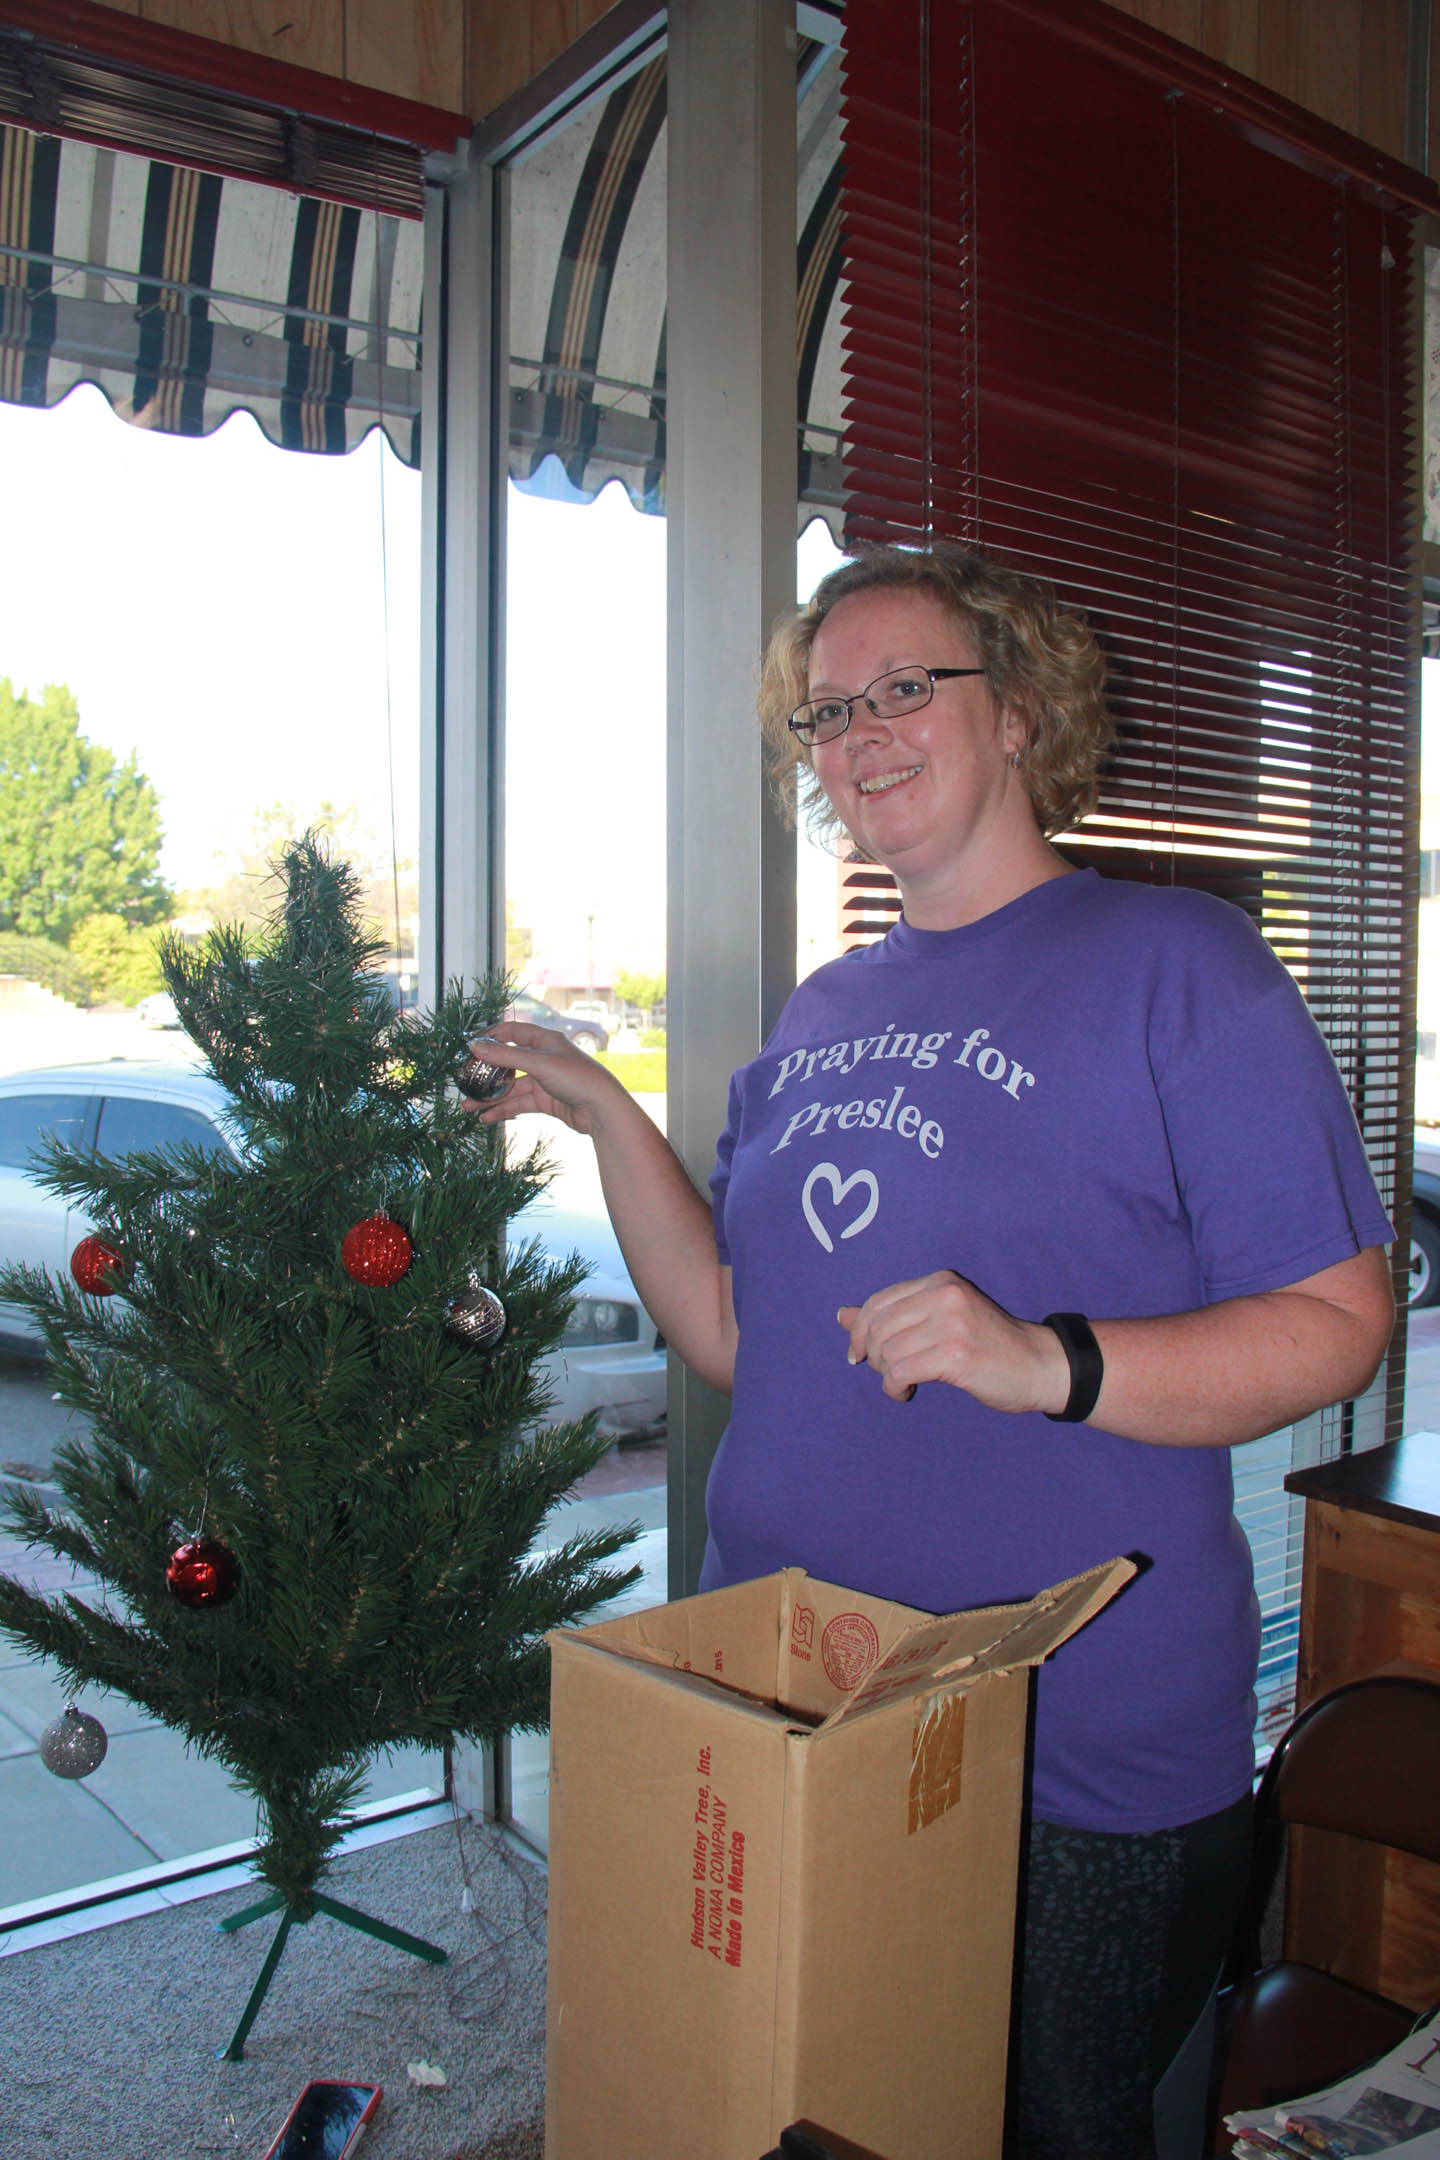 Amanda Gilman, Today’s Civic Women, decorates the Toys for Tots Christmas tree in the Nodaway News Leader’s window. Last year, 261 local children received gifts from the program organized by Today’s Civic Women. Community members may drop off new toys at any local donation bin. For each toy donated at the Nodaway News Leader office, you’ll receive $5 off any annual Nodaway News Leader subscription. 